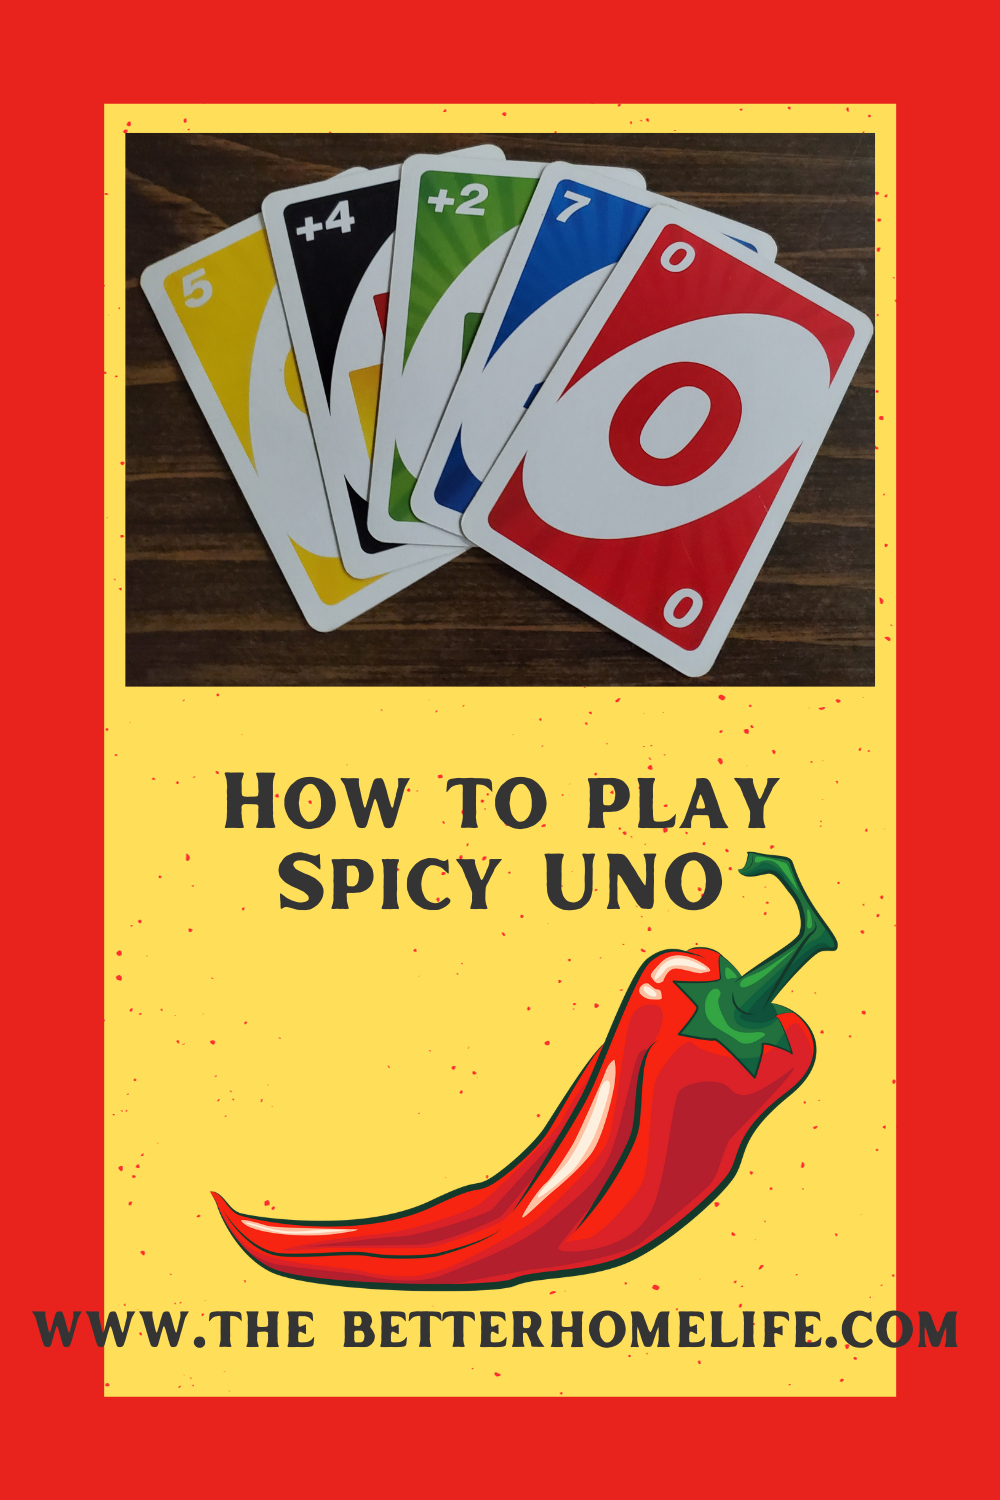 How to play spicy UNO